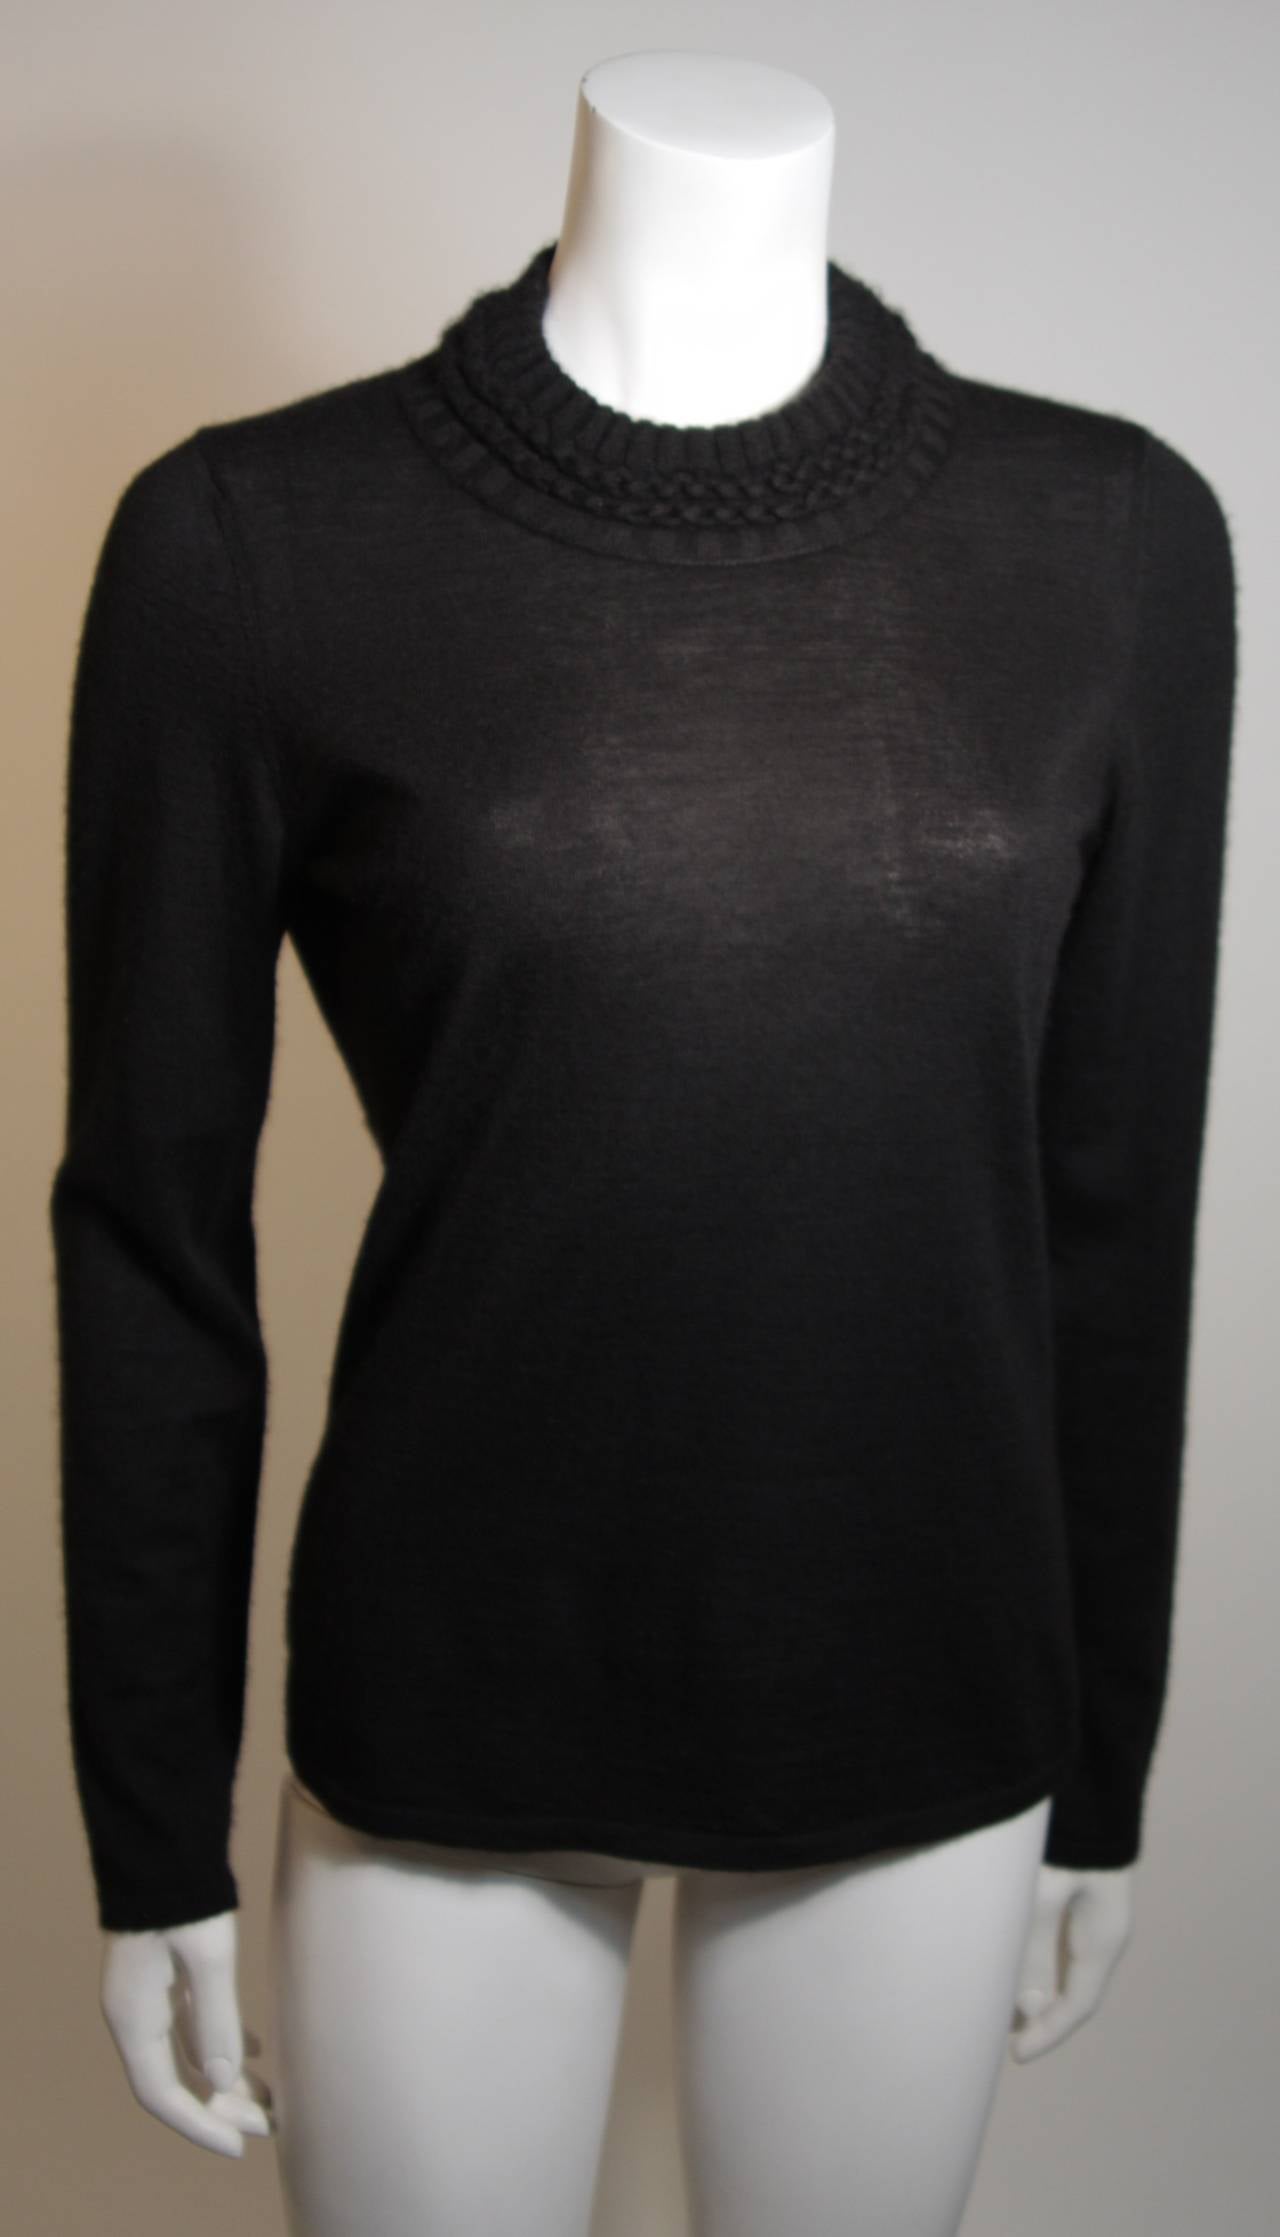 This Oscar De La Renta sweater is a pull over style and composed of black Cashmere. Made in Italy. 

Measures (Approximately)
Length: 25.25